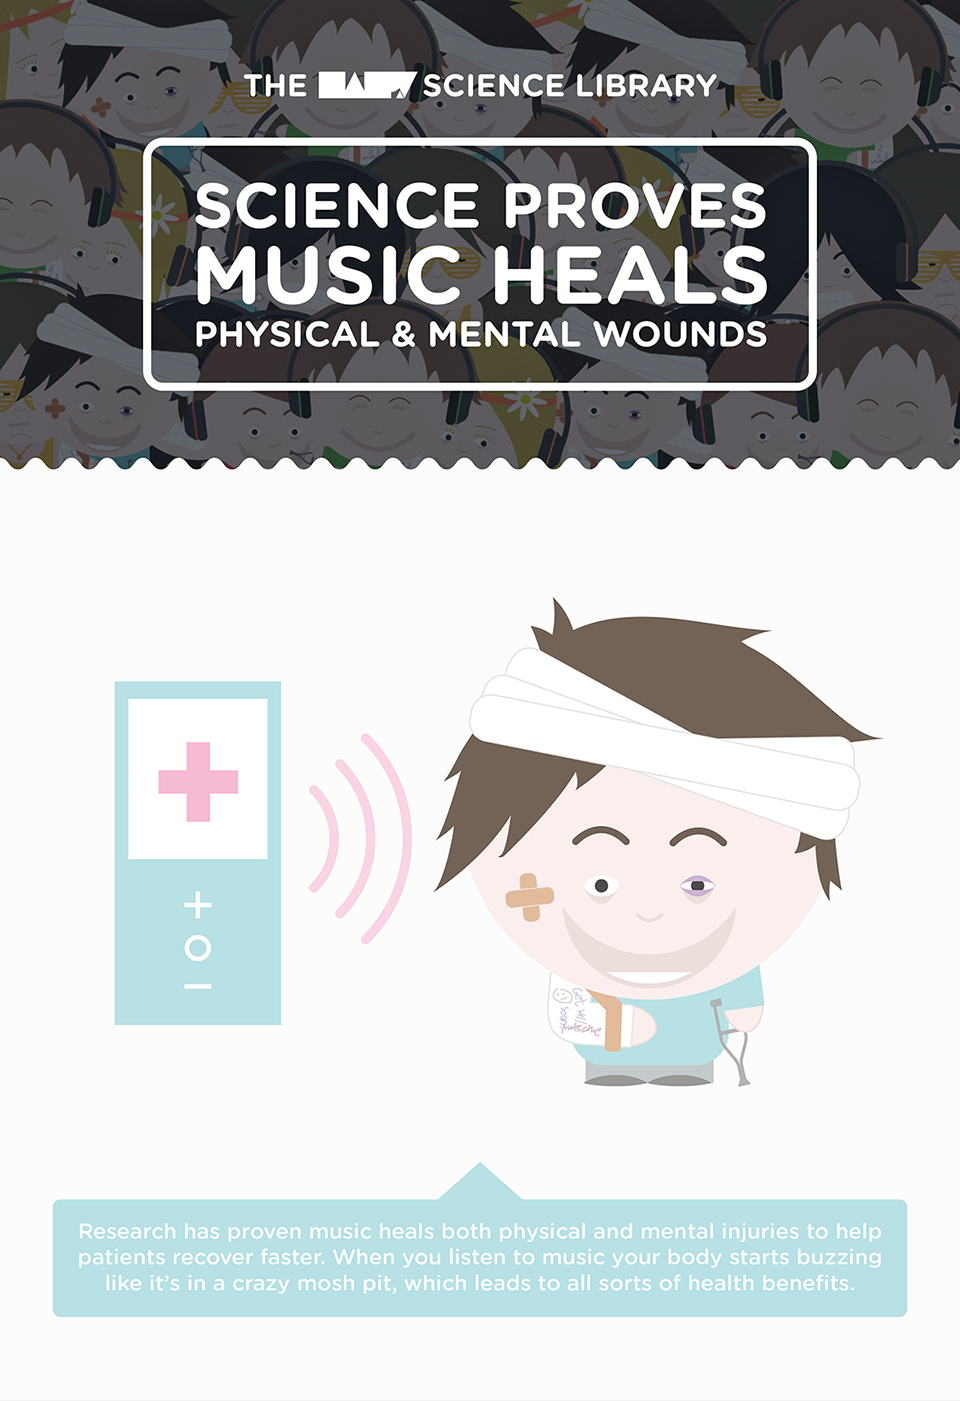 Music Heals physical and mental wounds